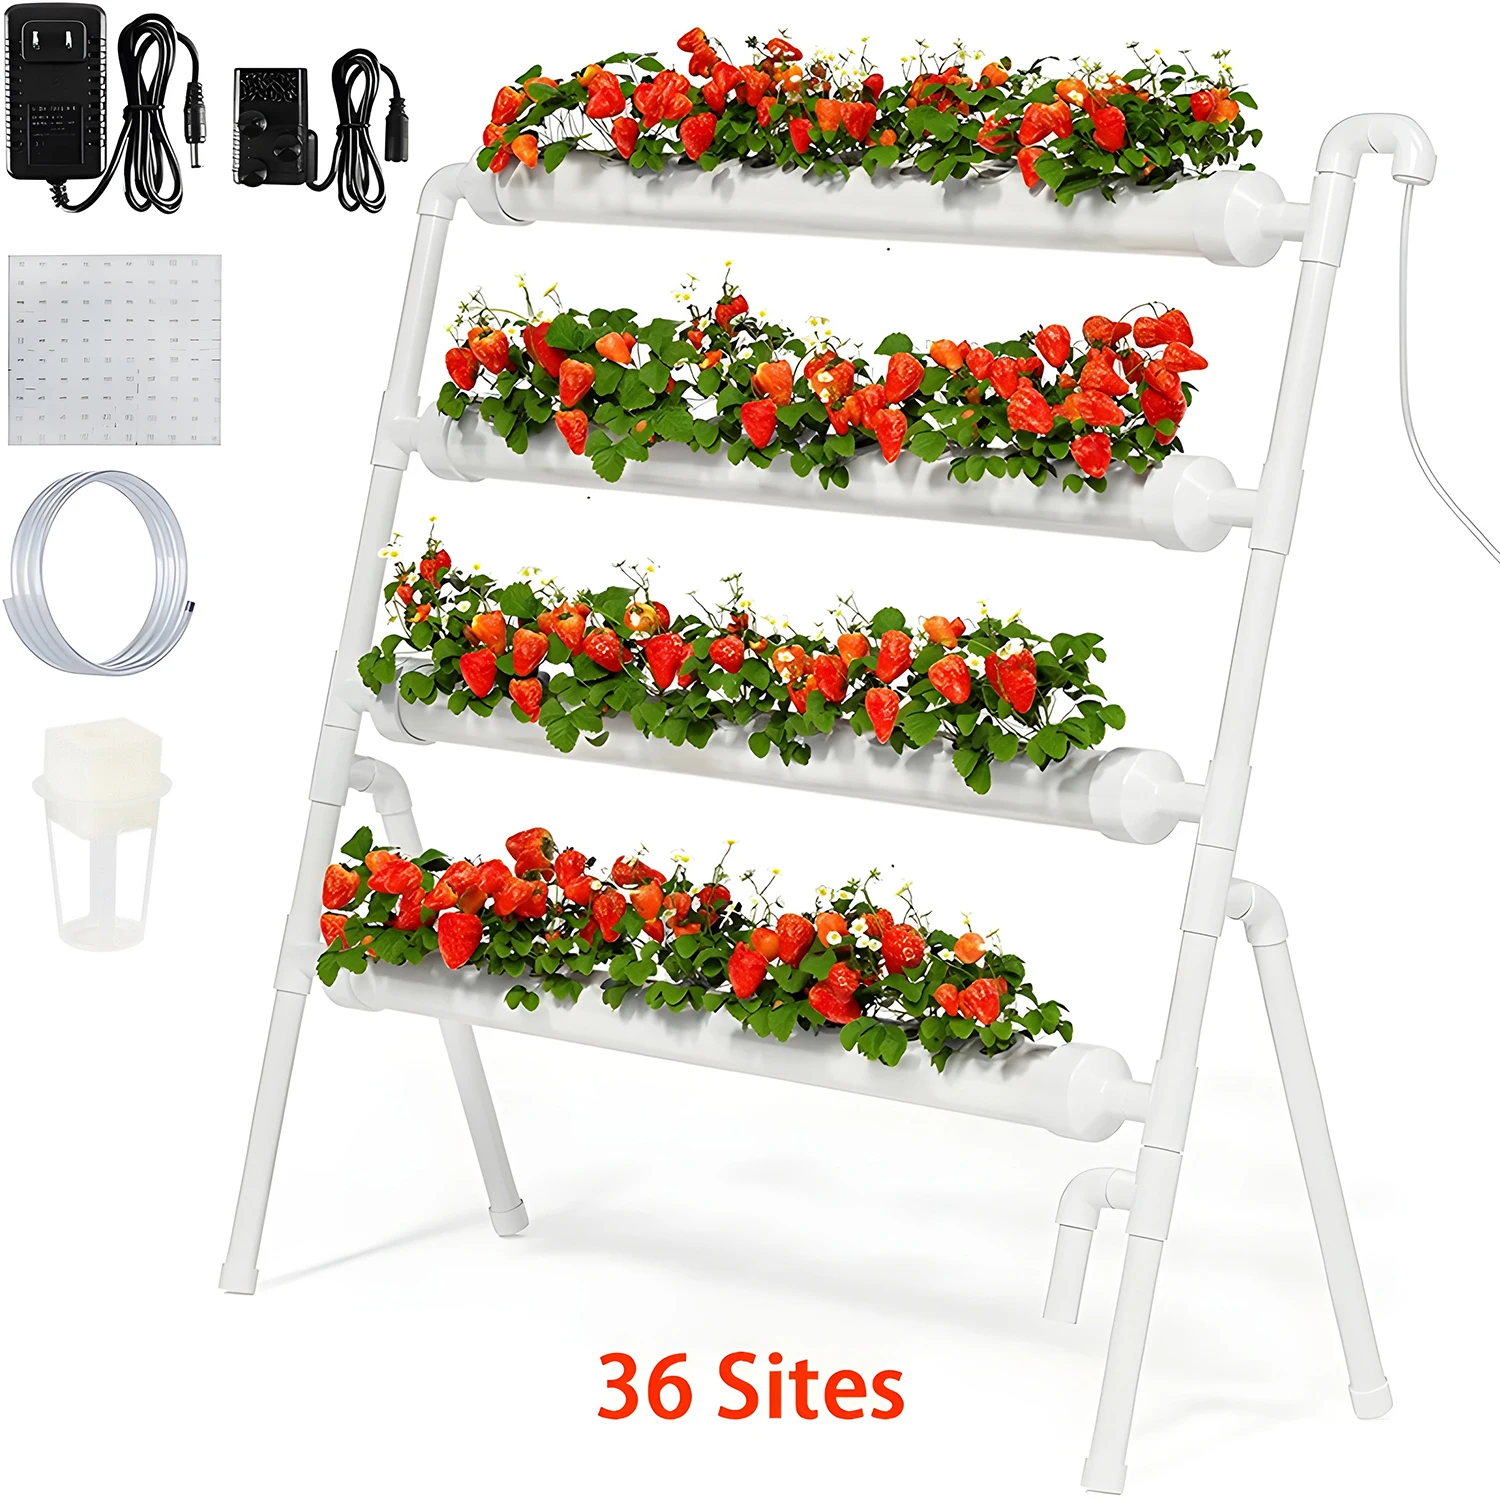 

36/Sites Hydroponics Growing System Kits PVC-Pipe Hydroponic Garden Planting Vegetable and Herbs Growth Cultivation Equipment